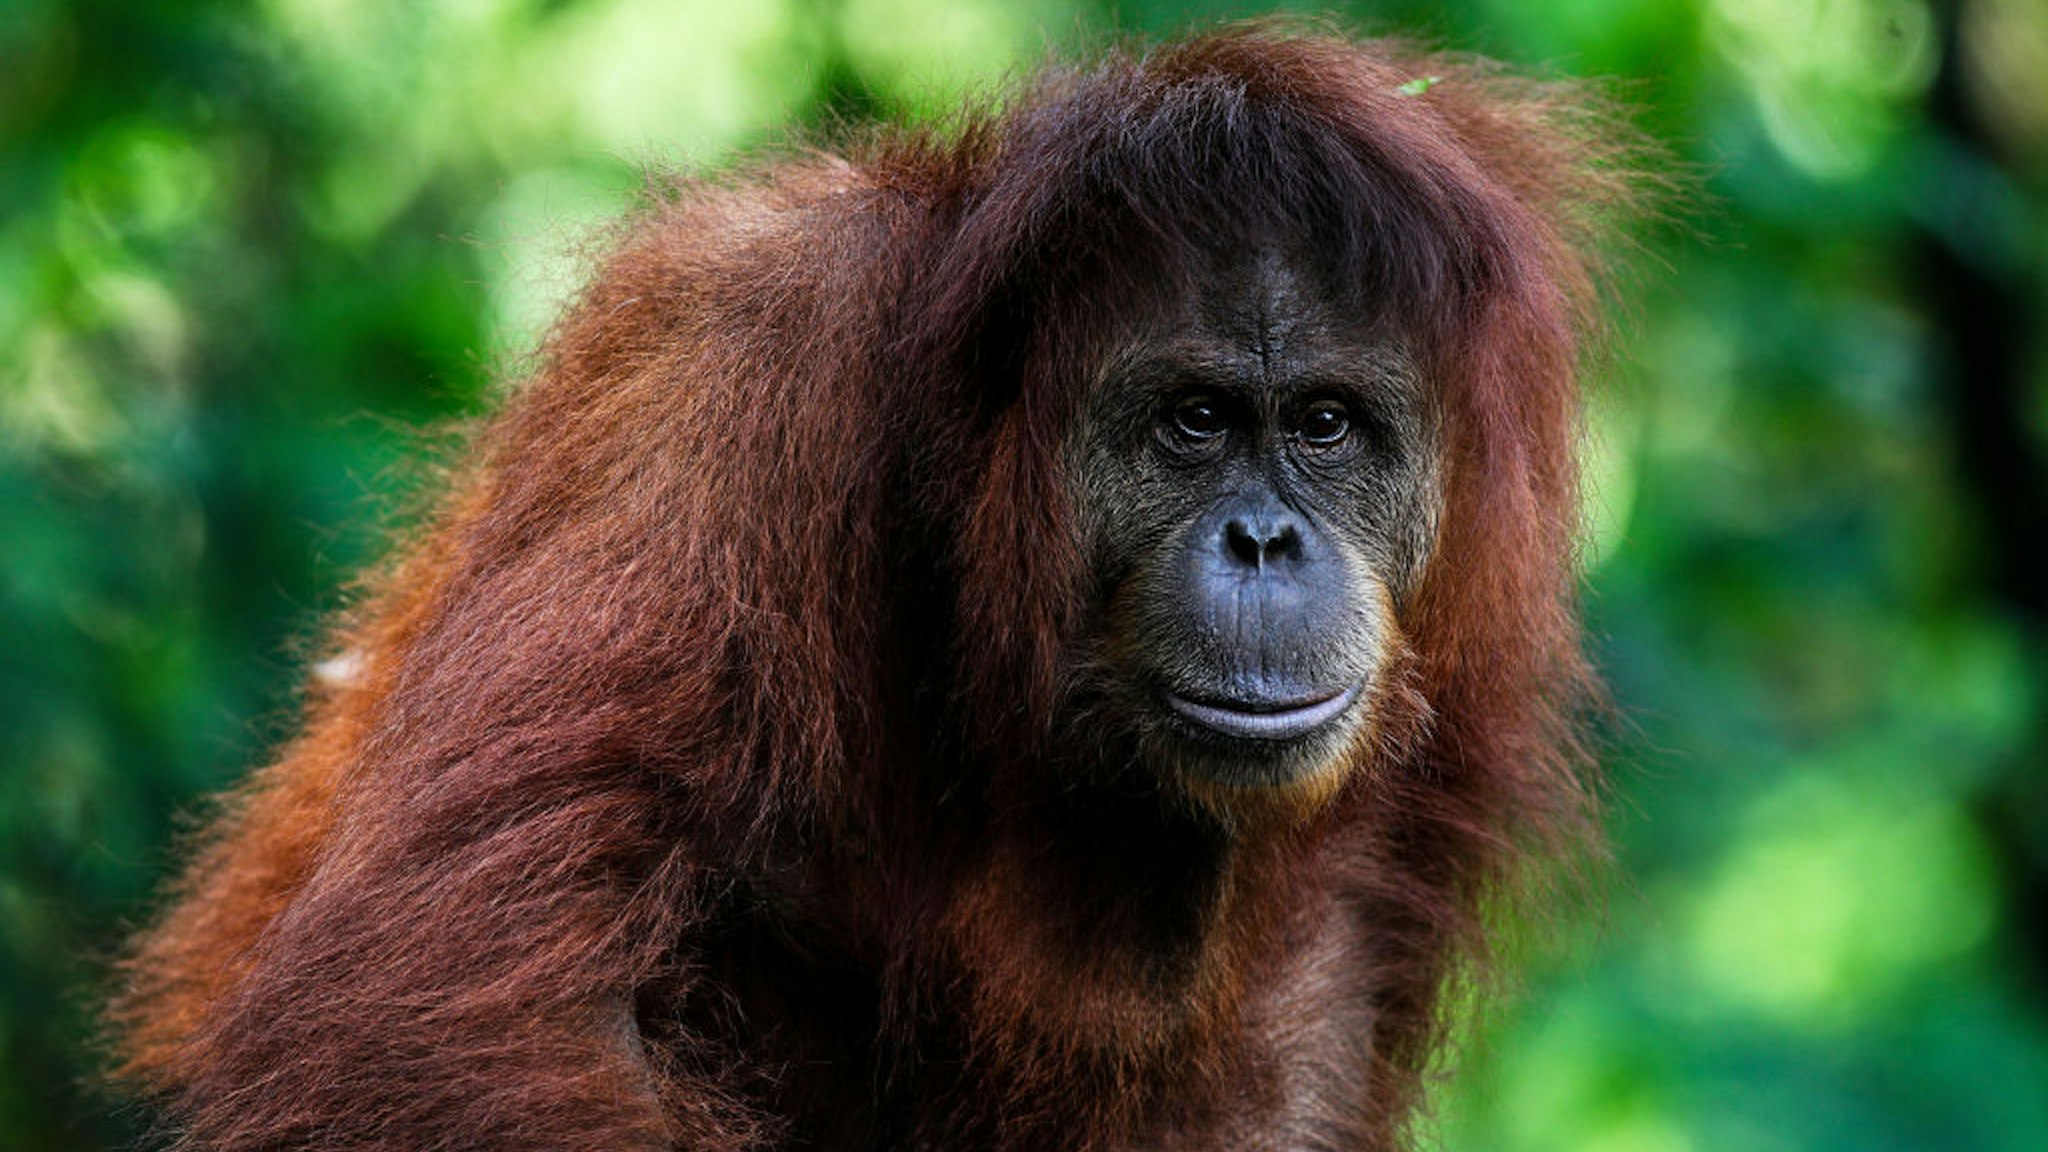 An Orangutan seen in the cage at the zoo in Bandung, West Java, Indonesia, May 4, 2020. Based on data from the Indonesian Zoo Society, taking into account as many as 92.11 percent of the zoo can only last less than a month to meet the feed needs of the Covid-19 pandemic. Meanwhile, the total population of the zoo reaches 70 thousand, consisting of 4,912 species. (Photo by: Agvi Firdaus/INA Photo Agency/Universal Images Group via Getty Images)